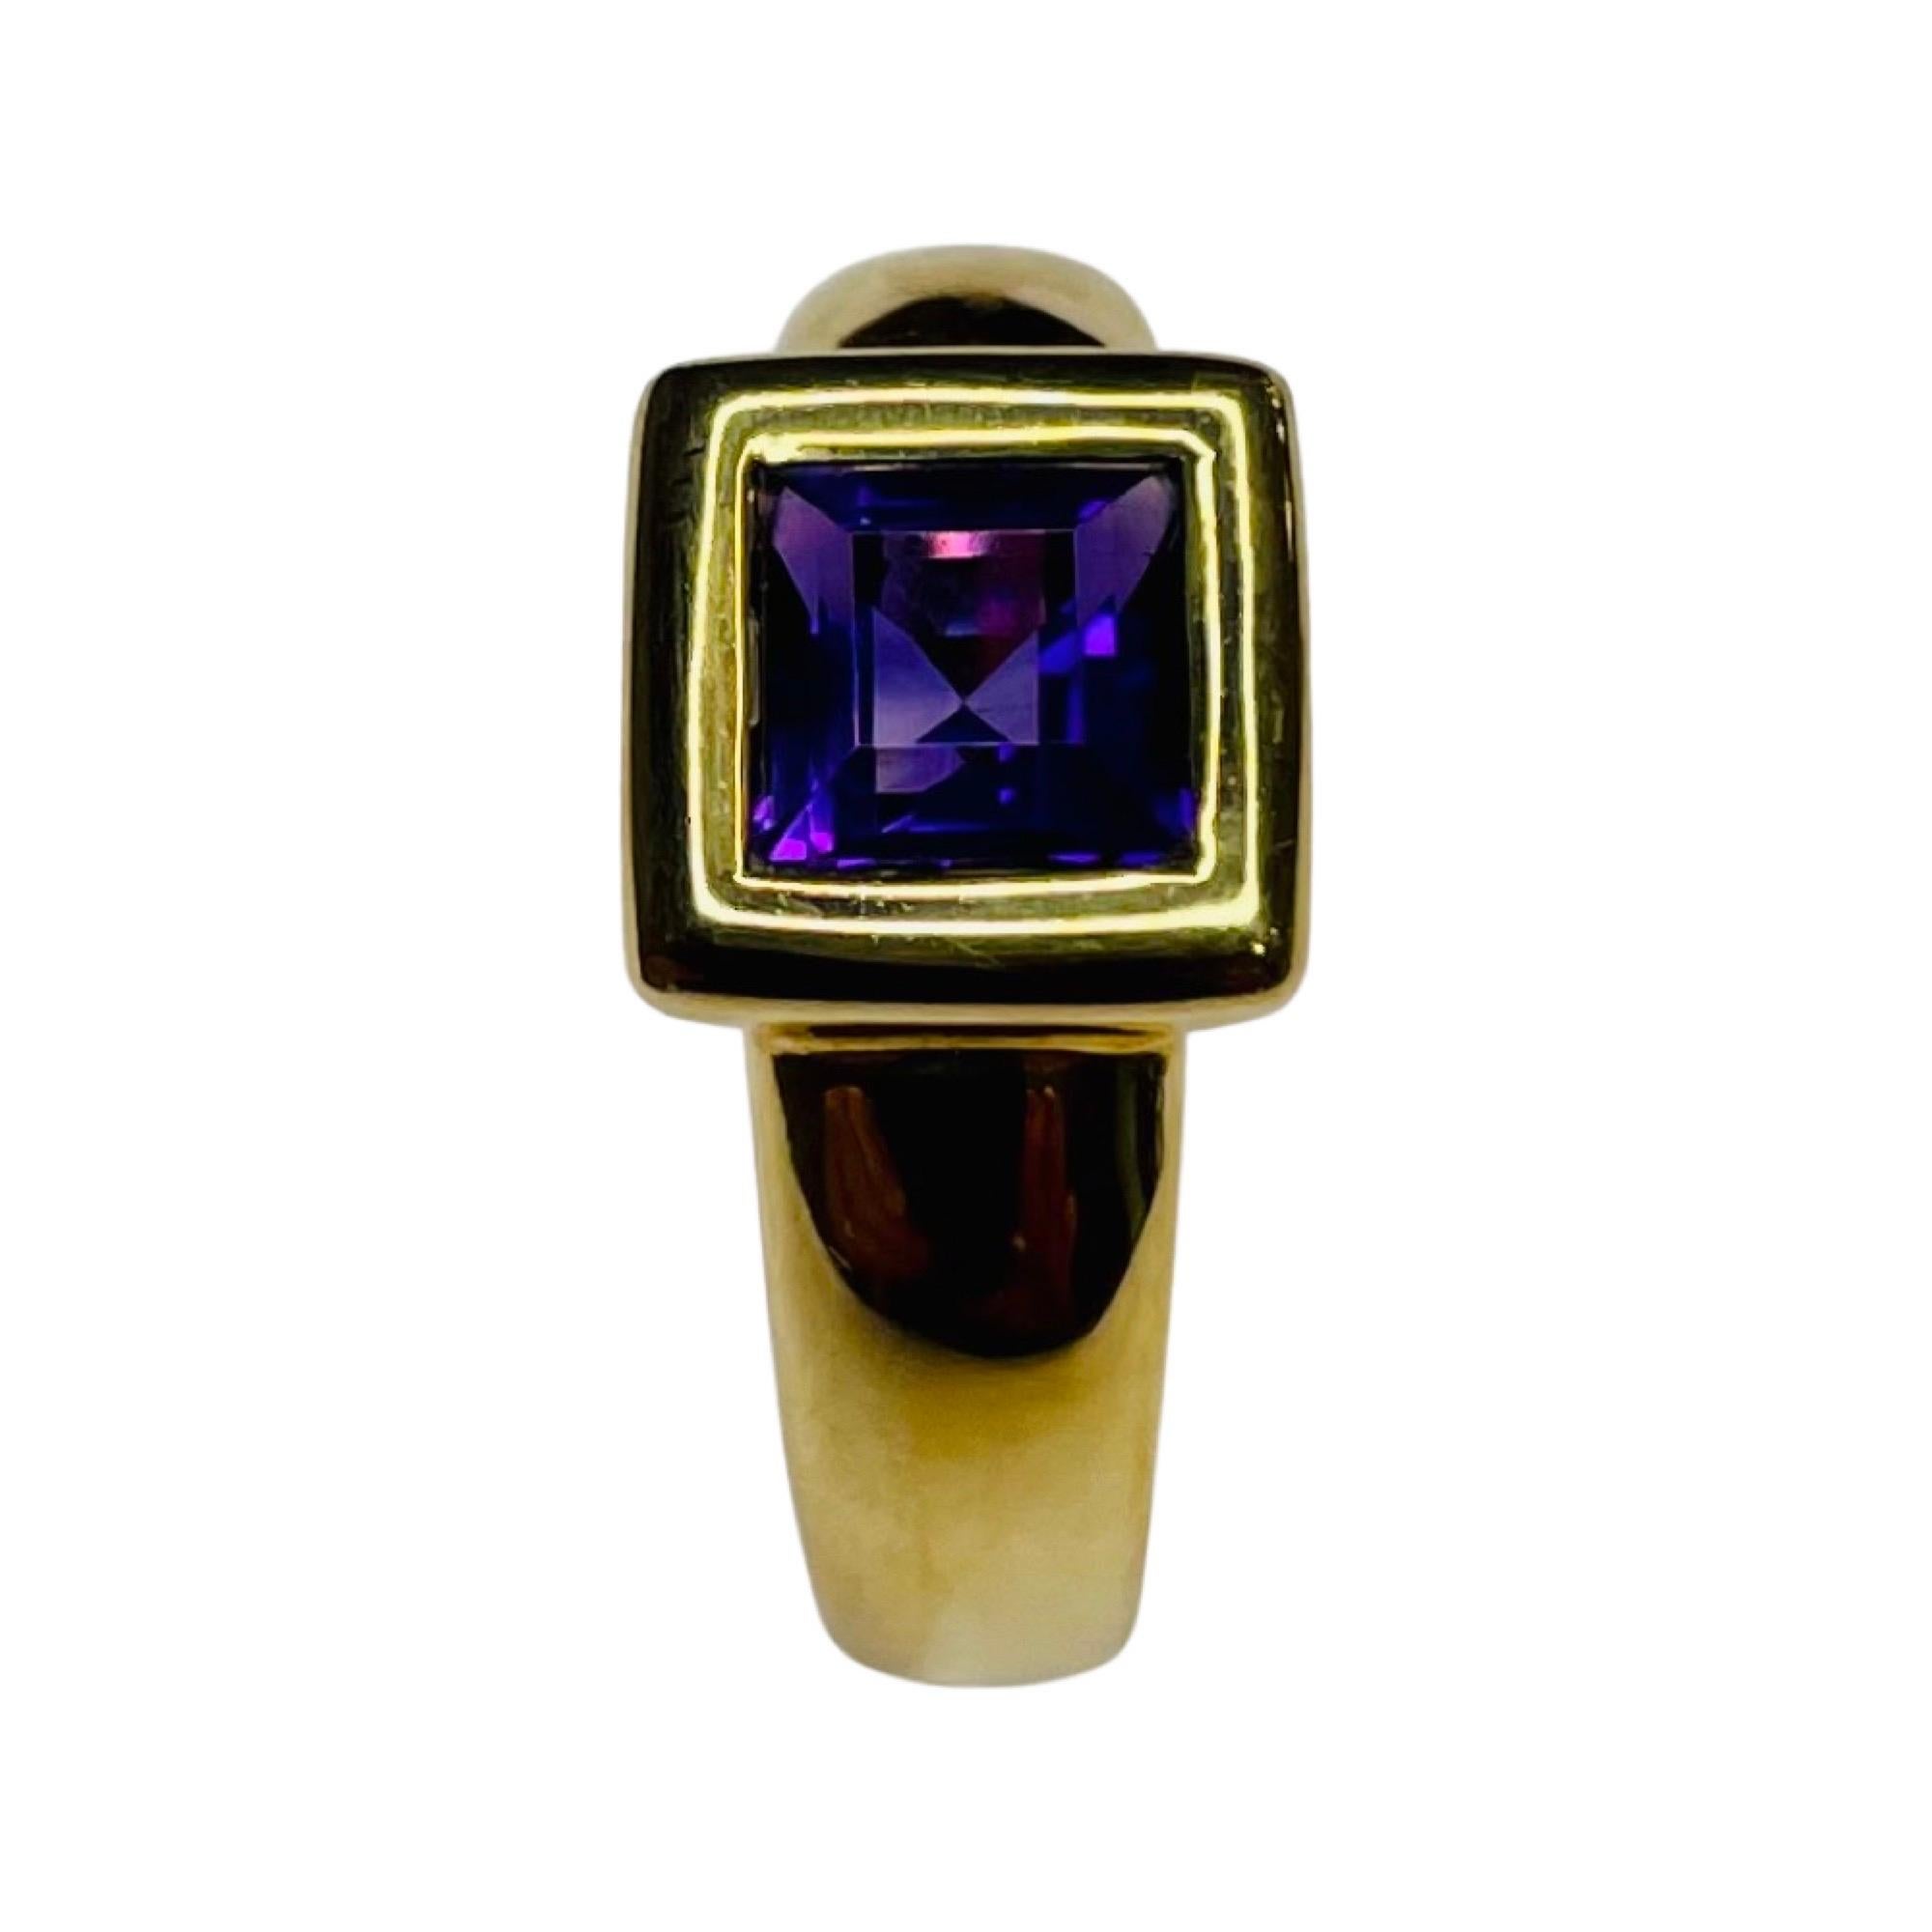 Contemporary Hammer & Sohne 18K Yellow Gold Ring with Faceted Square Cut Amethyst For Sale